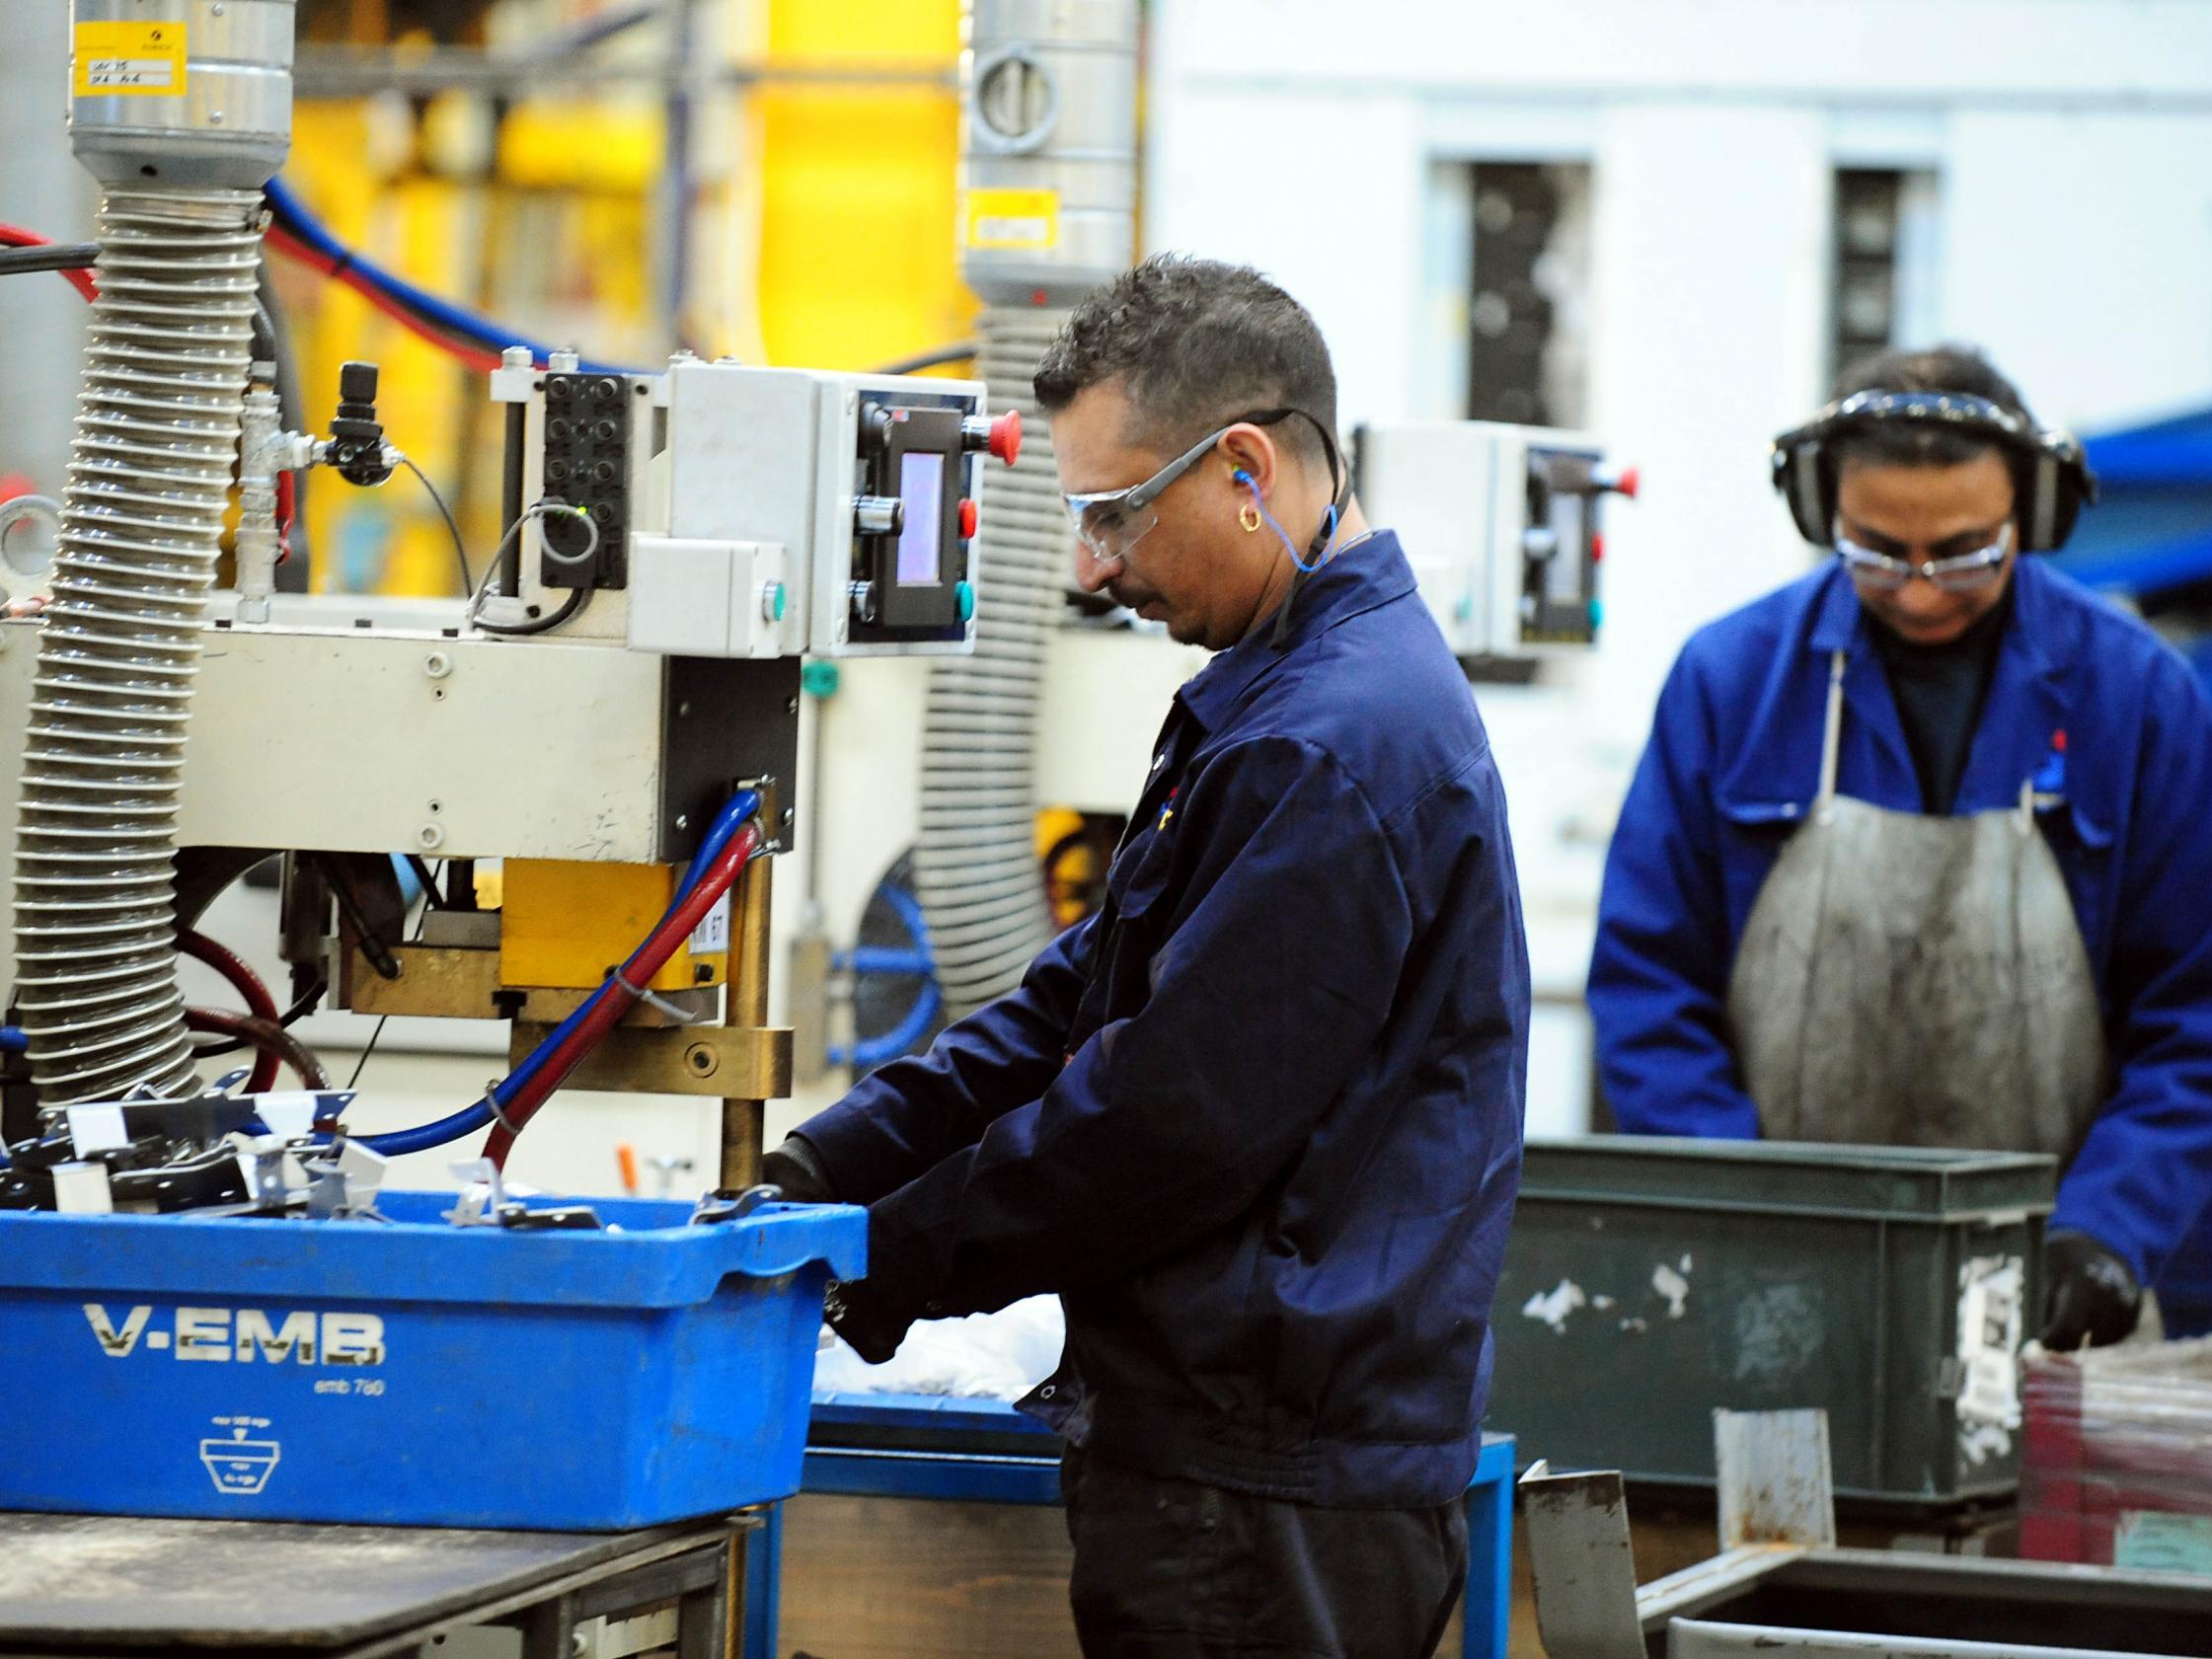 More than half of UK manufacturers are planning to make staff redundant this year